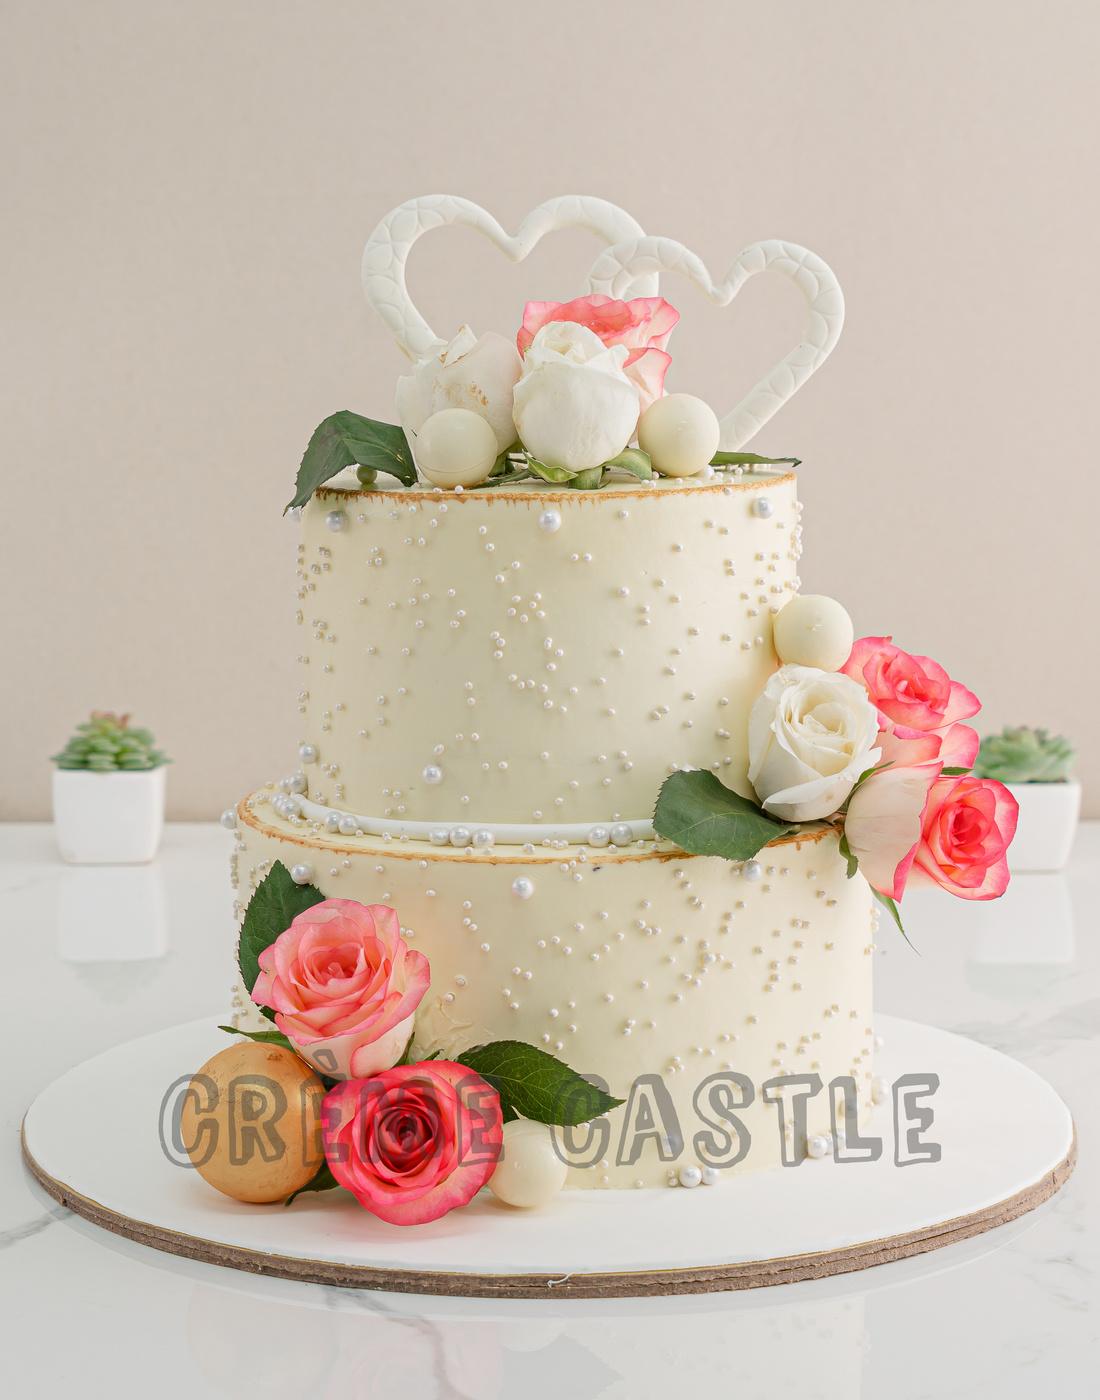 5 Wedding Cake Styles to Consider for Your Wedding | Bella Bridesmaids